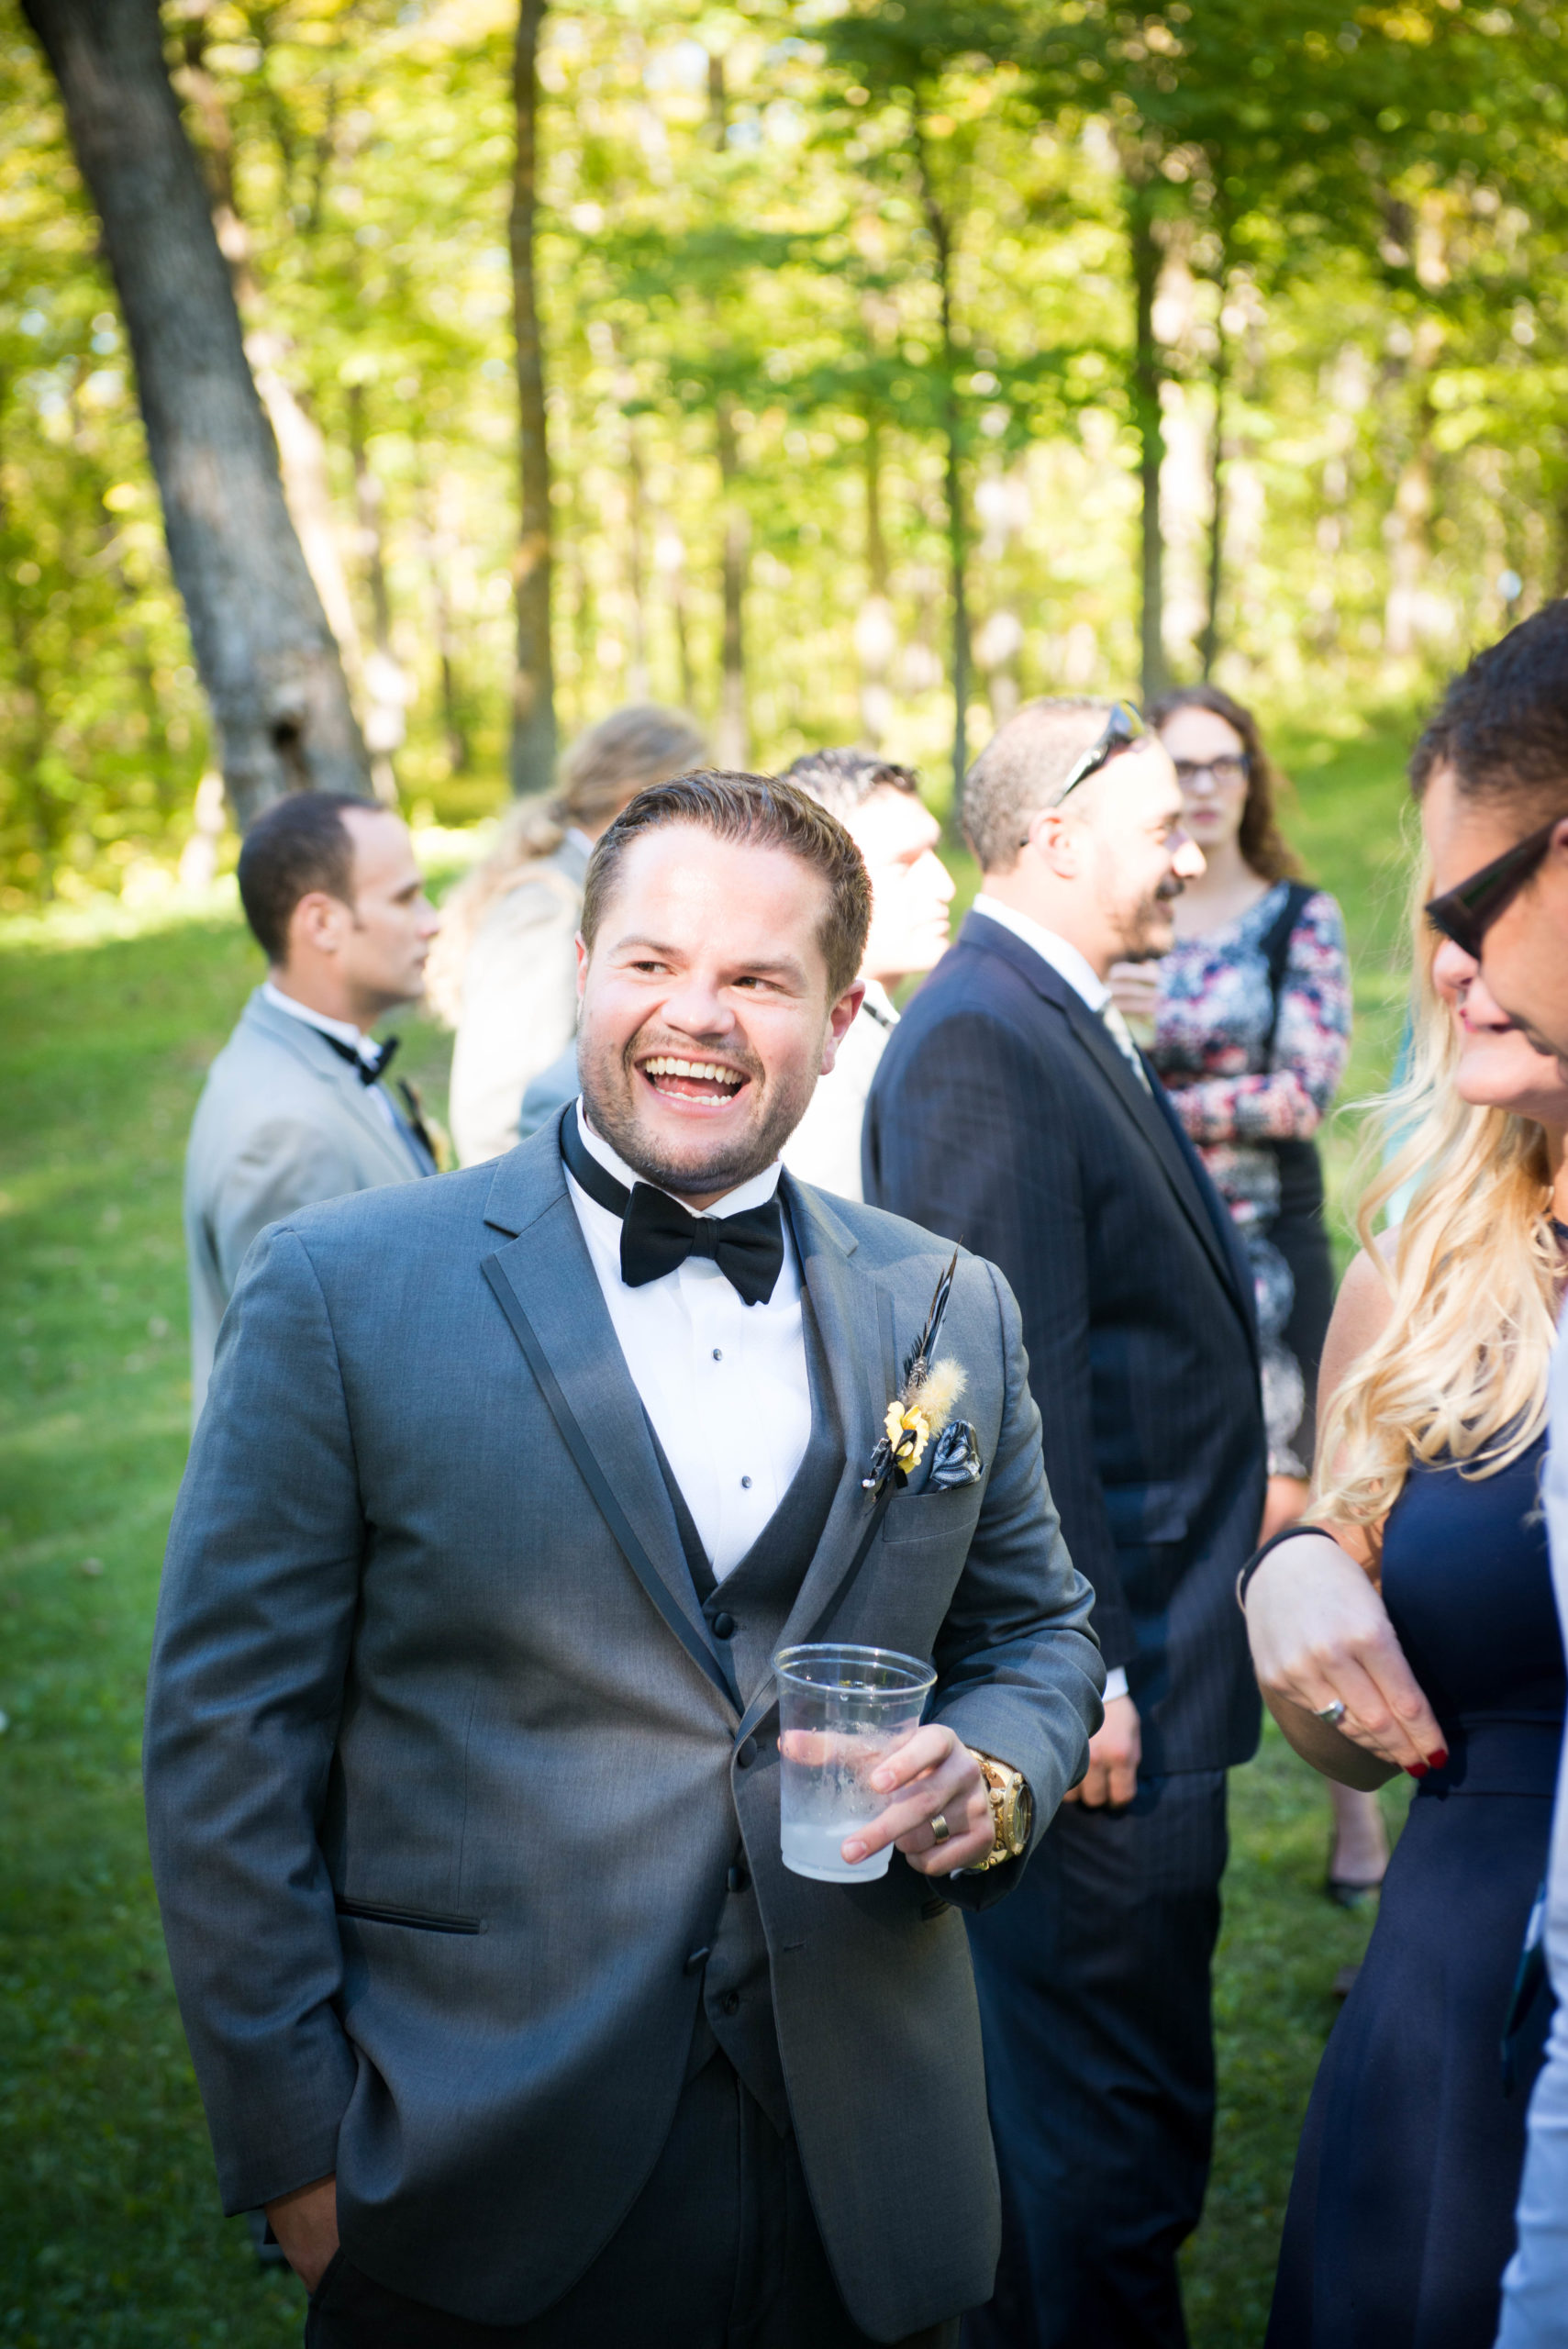 Groom smiling after ceremony in Minnesota